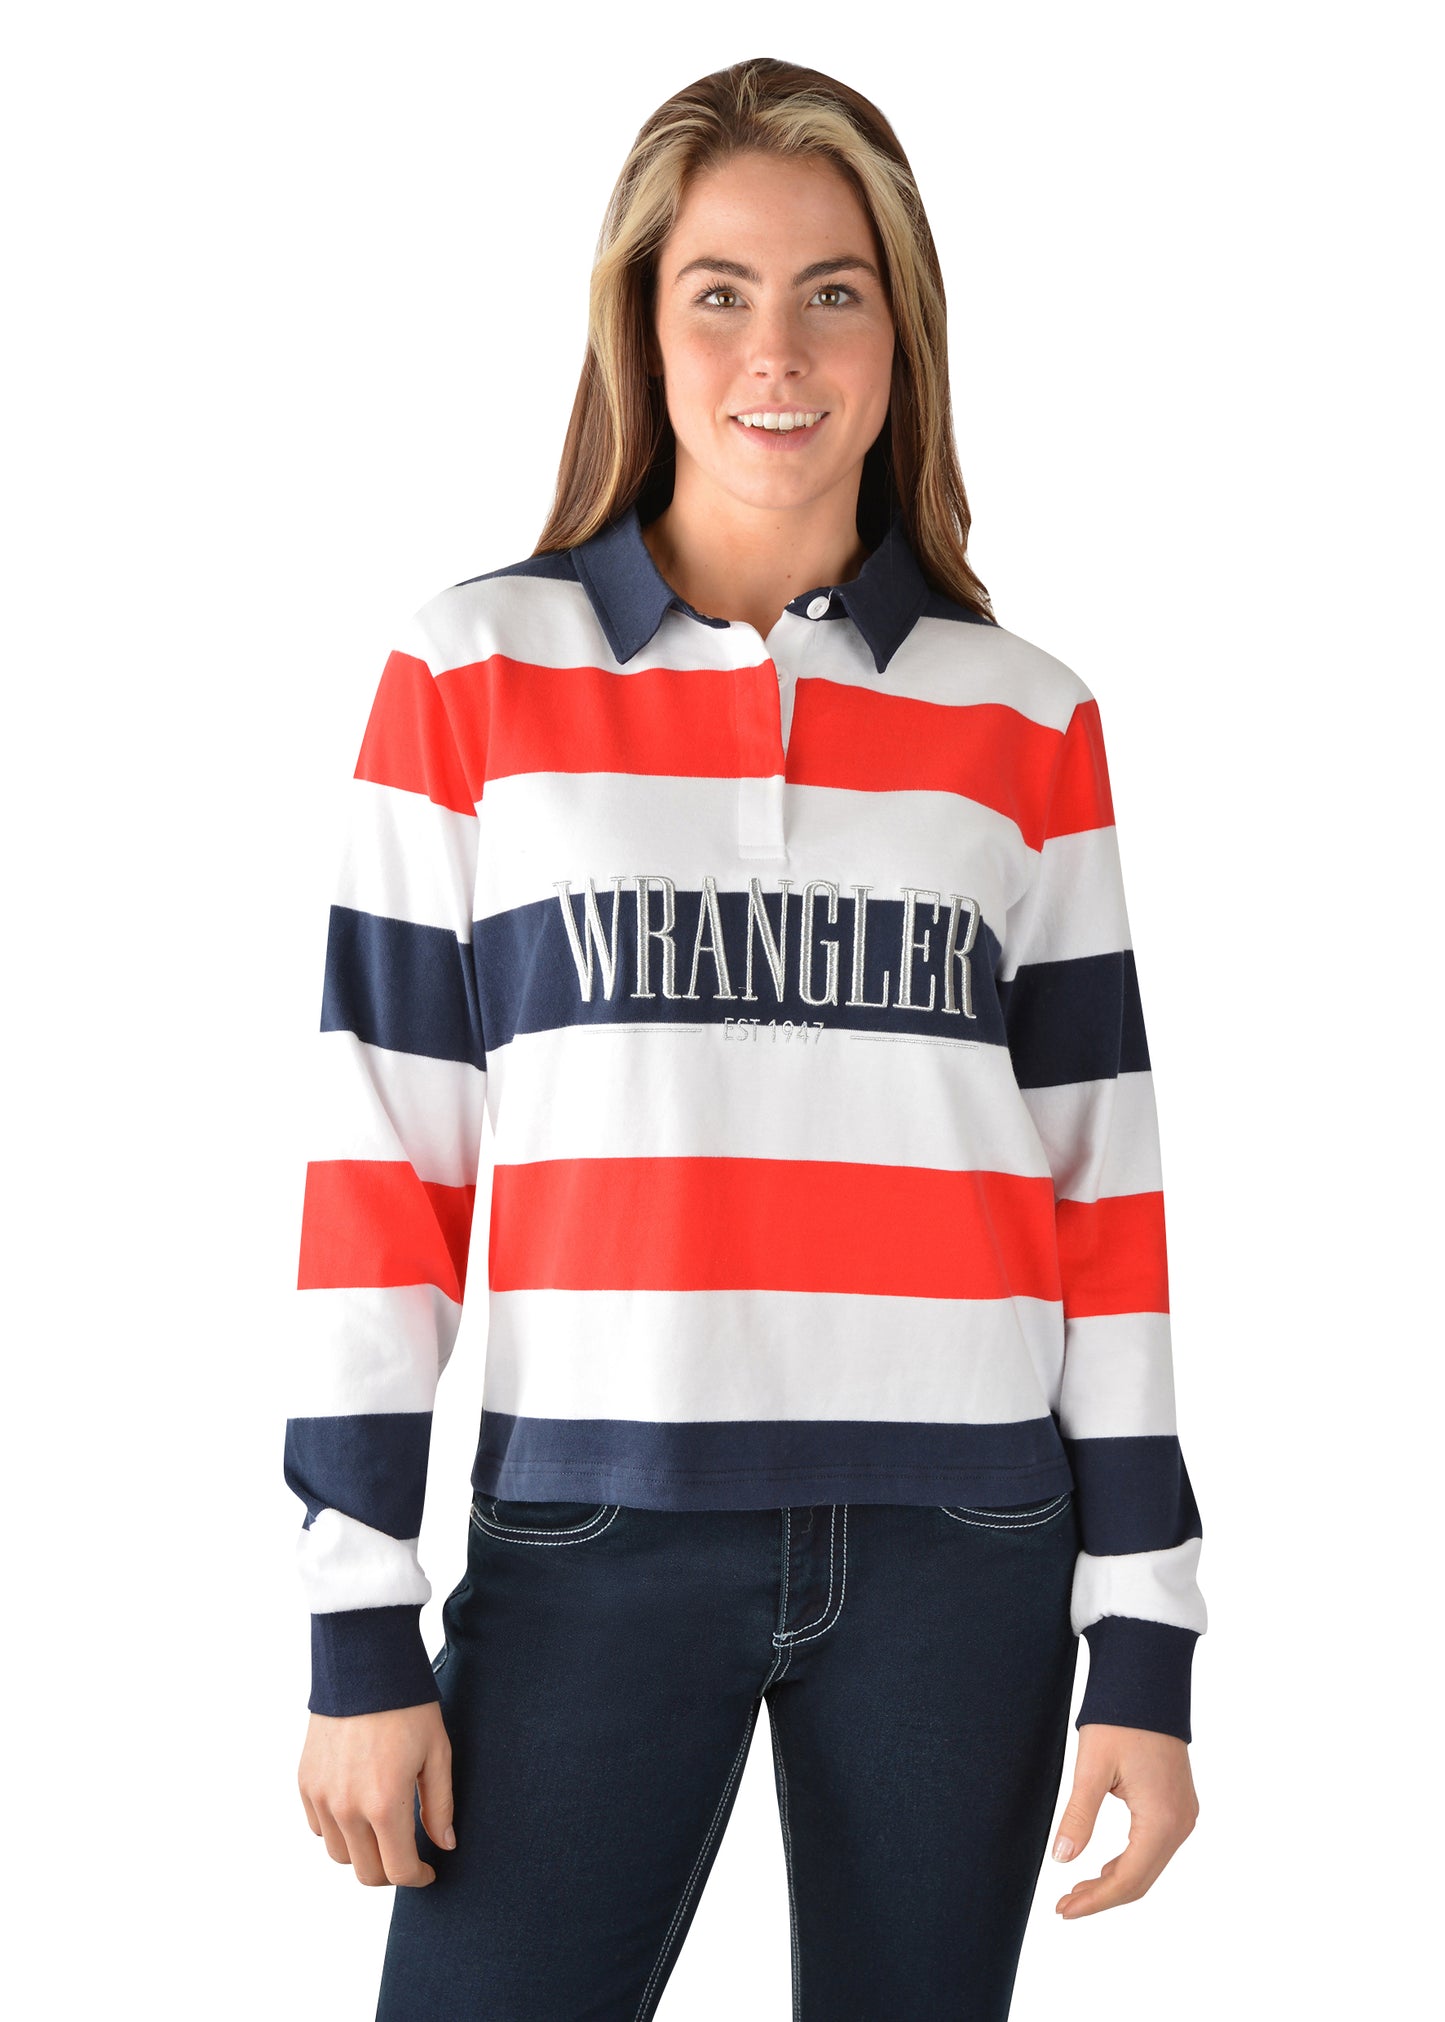 Wrangler Ladies Charlotte Fashion Rugby - Navy/Red/White - X3W2577940